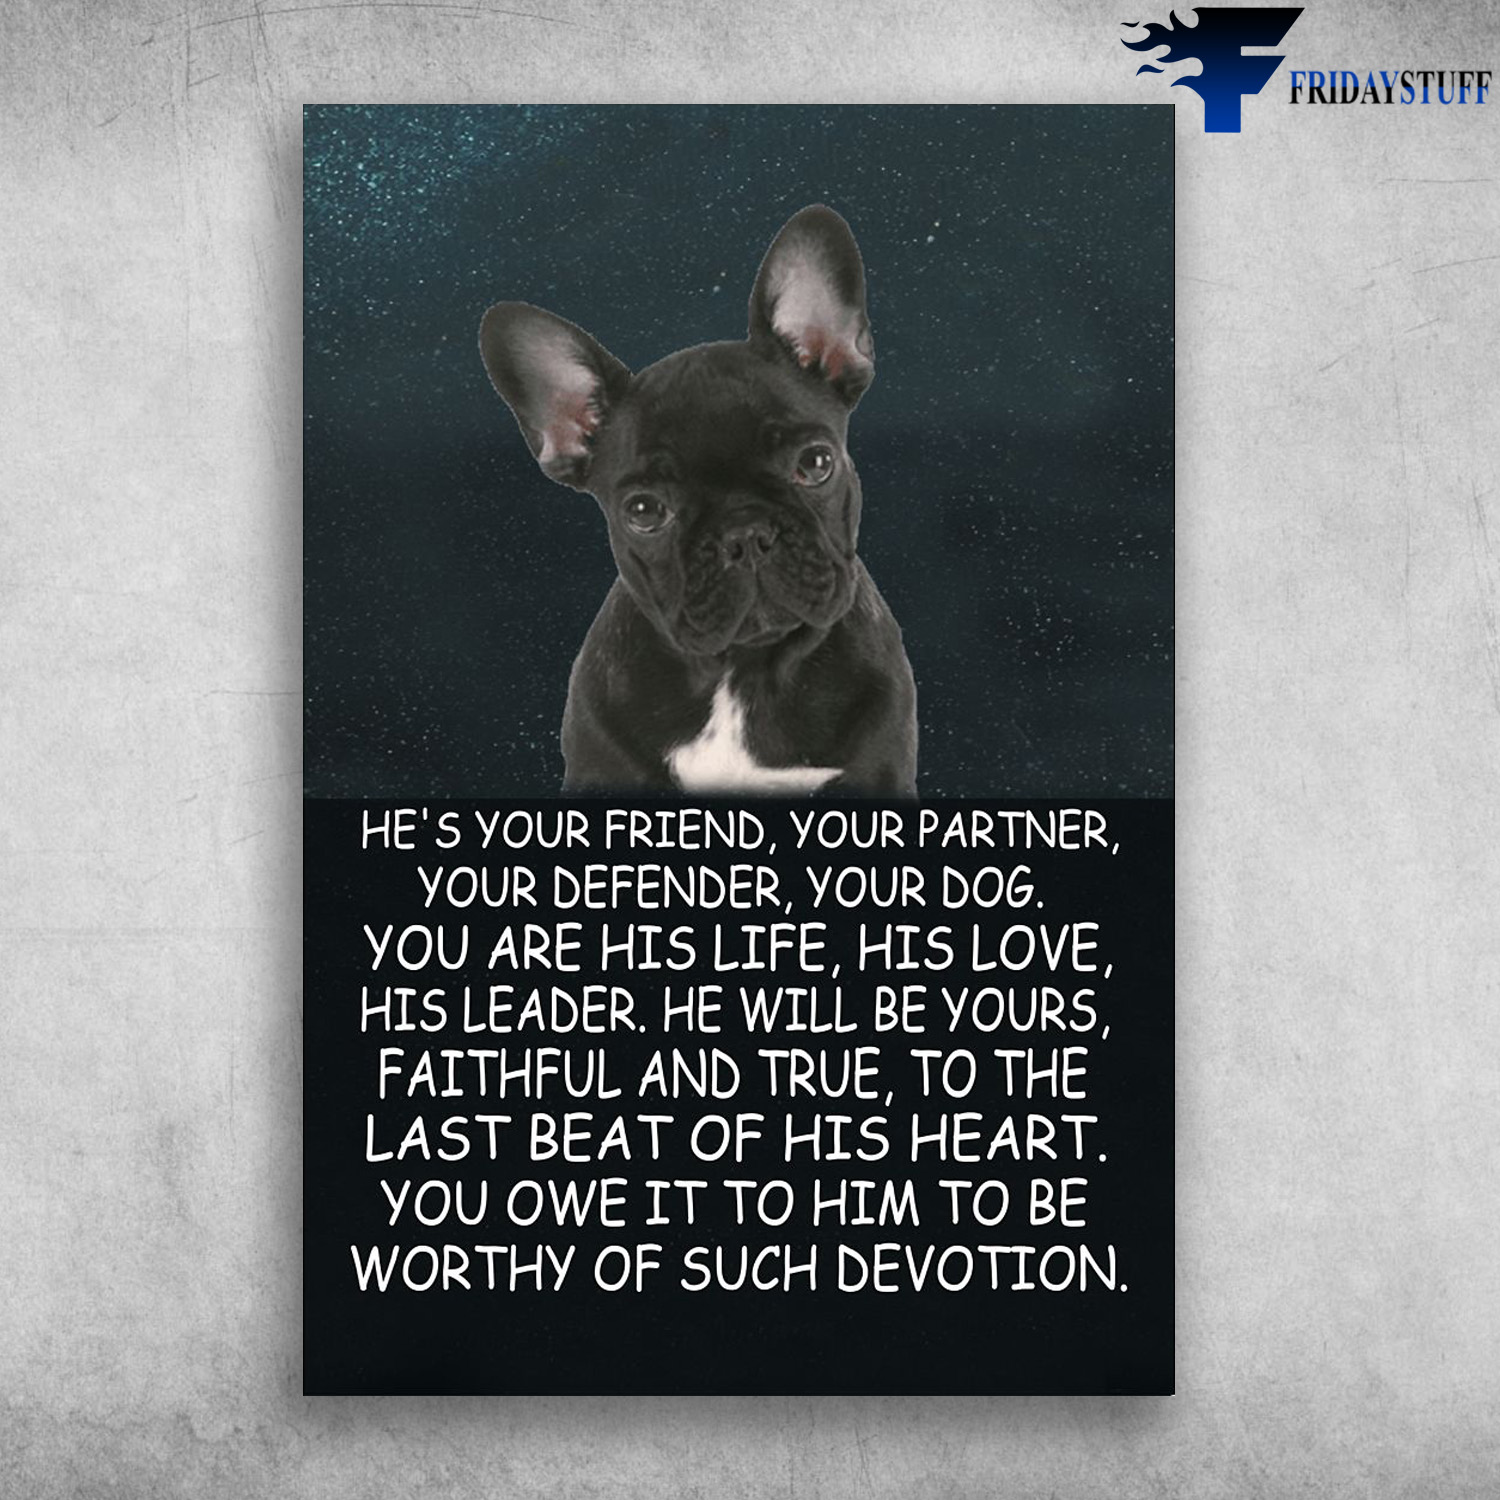 French Bulldog - He's Your Friend, Your Partner, Your Defender, Your Dog, You Are His Life, His Love, His Leader, He Will Be Yours, Faithful And True, To The Last Of His Heart, You Owe It To Him, To Be Worthy Of Such Devotion